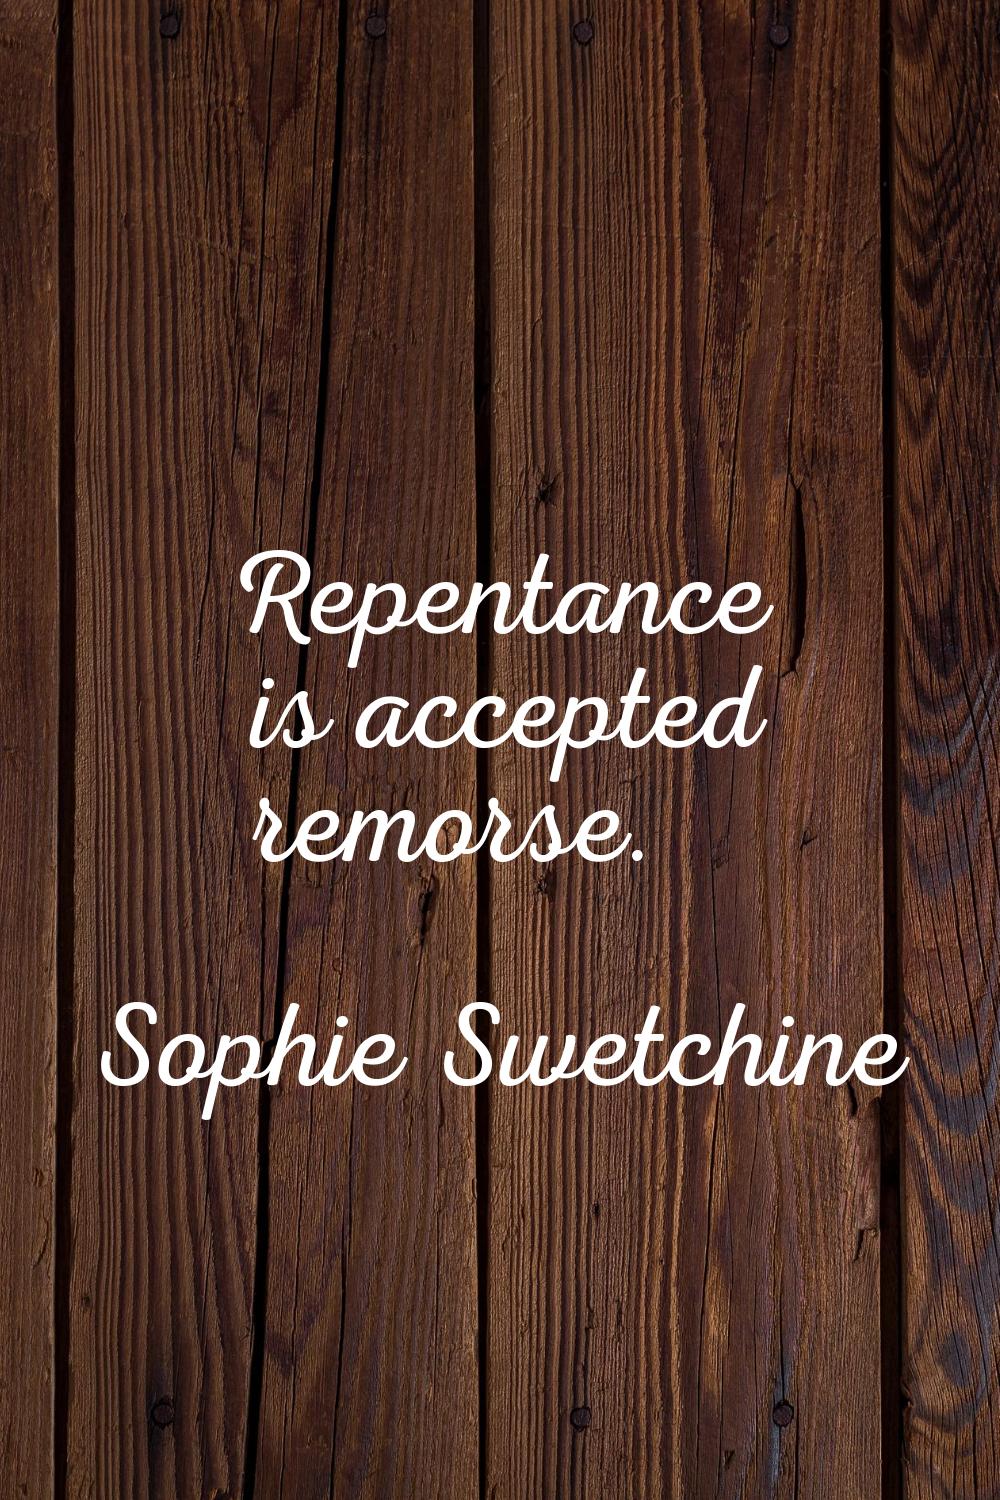 Repentance is accepted remorse.